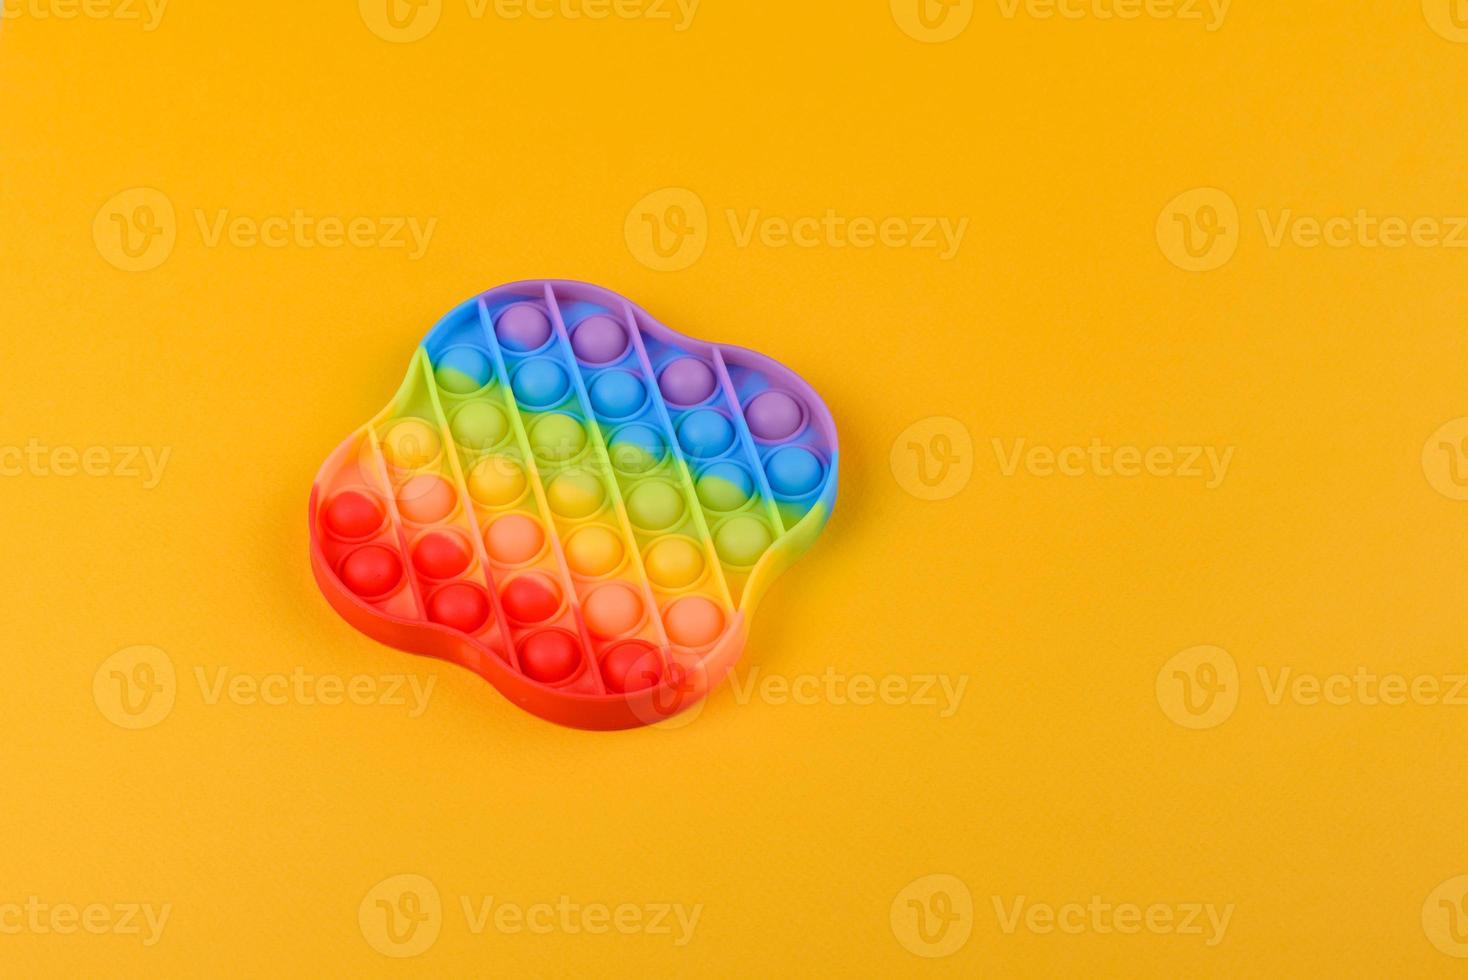 Bright colorful children's toy made of silicone designed to relieve stress photo